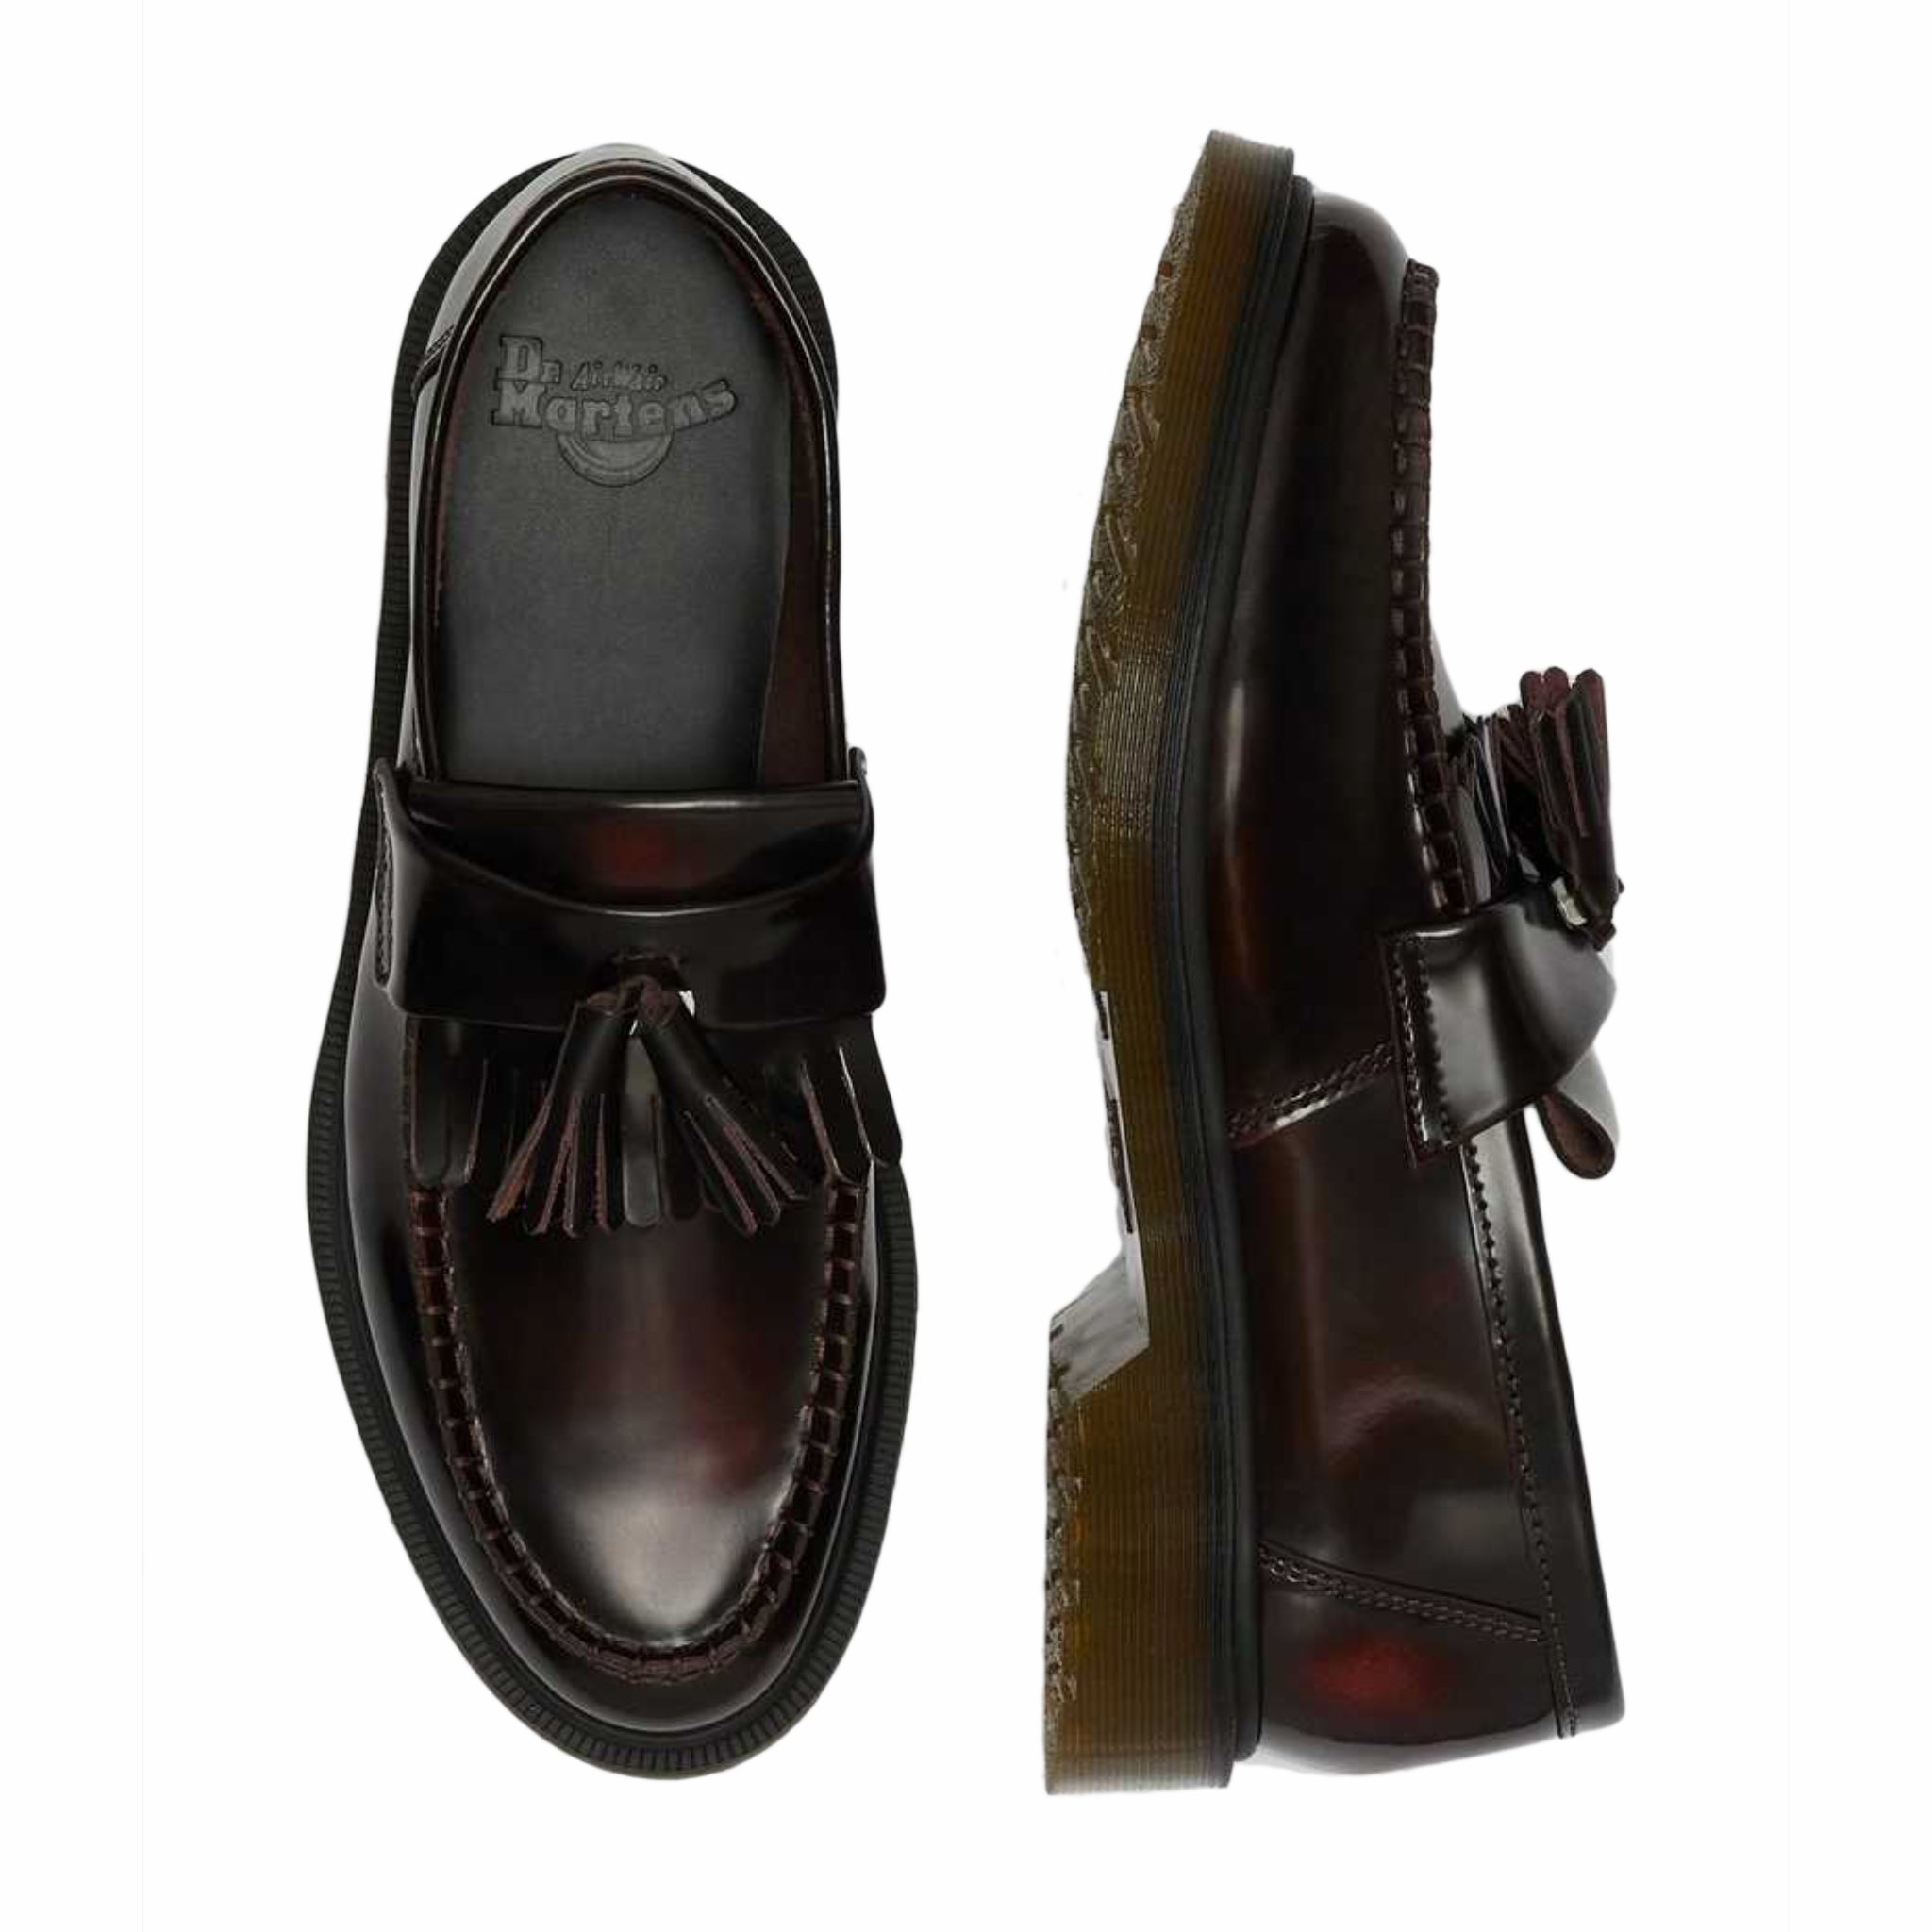 Dr. Martens Adrian Leather Tassel Loafer (Cherry Red Arcadia)